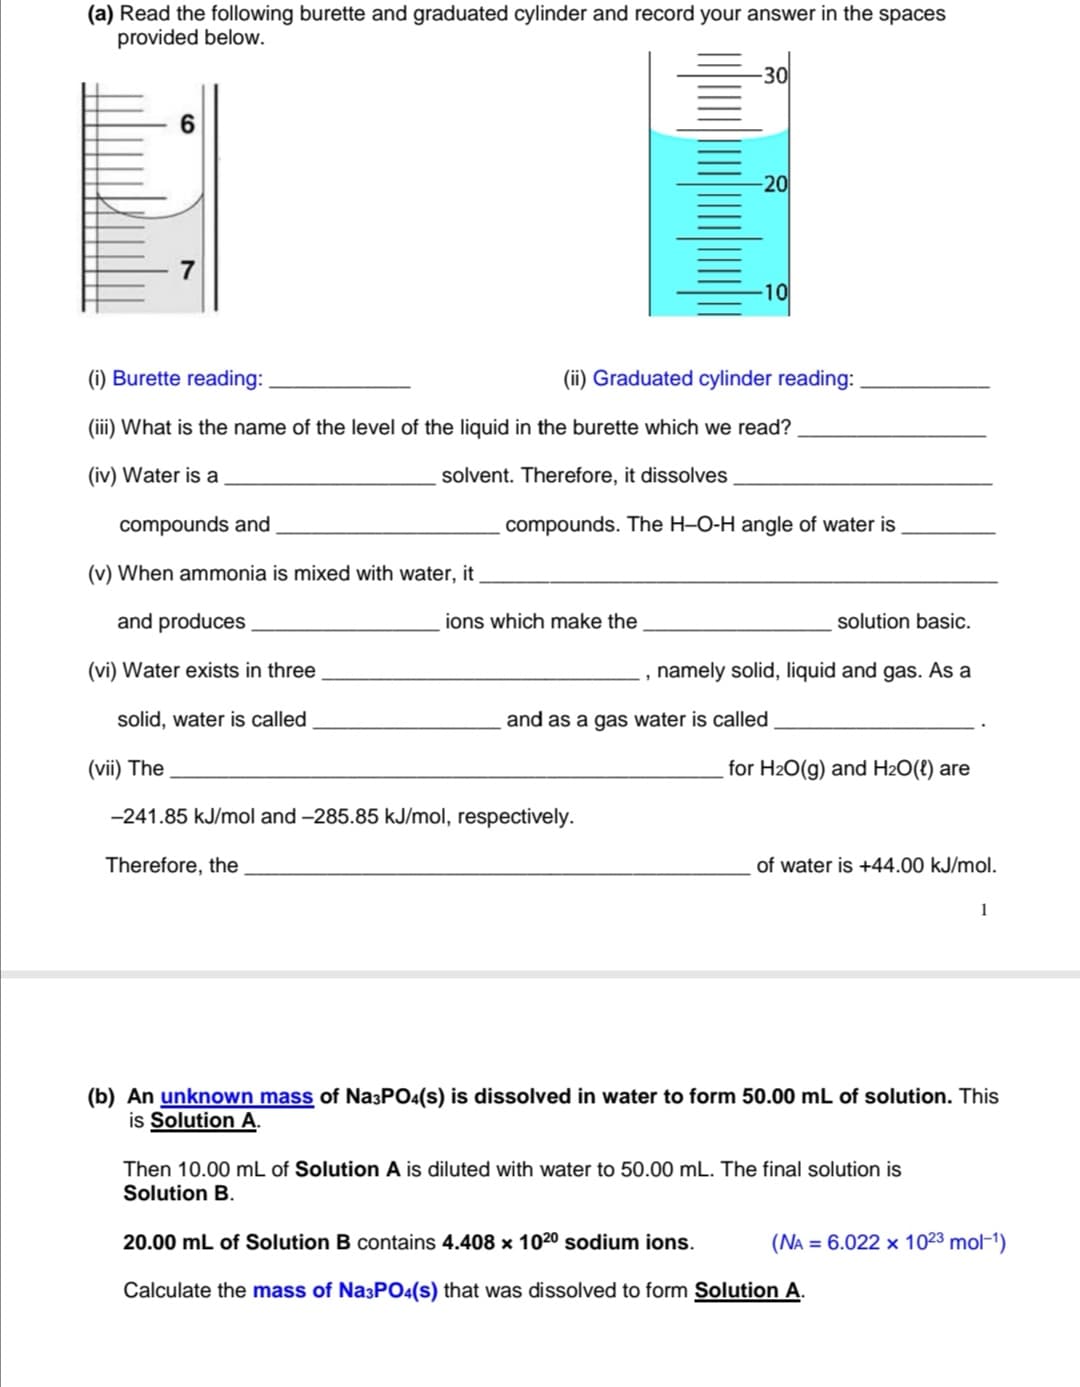 (a) Read the following burette and graduated cylinder and record your answer in the spaces
provided below.
-30
20
10
(i) Burette reading:
(ii) Graduated cylinder reading:
(iii) What is the name of the level of the liquid in the burette which we read?
